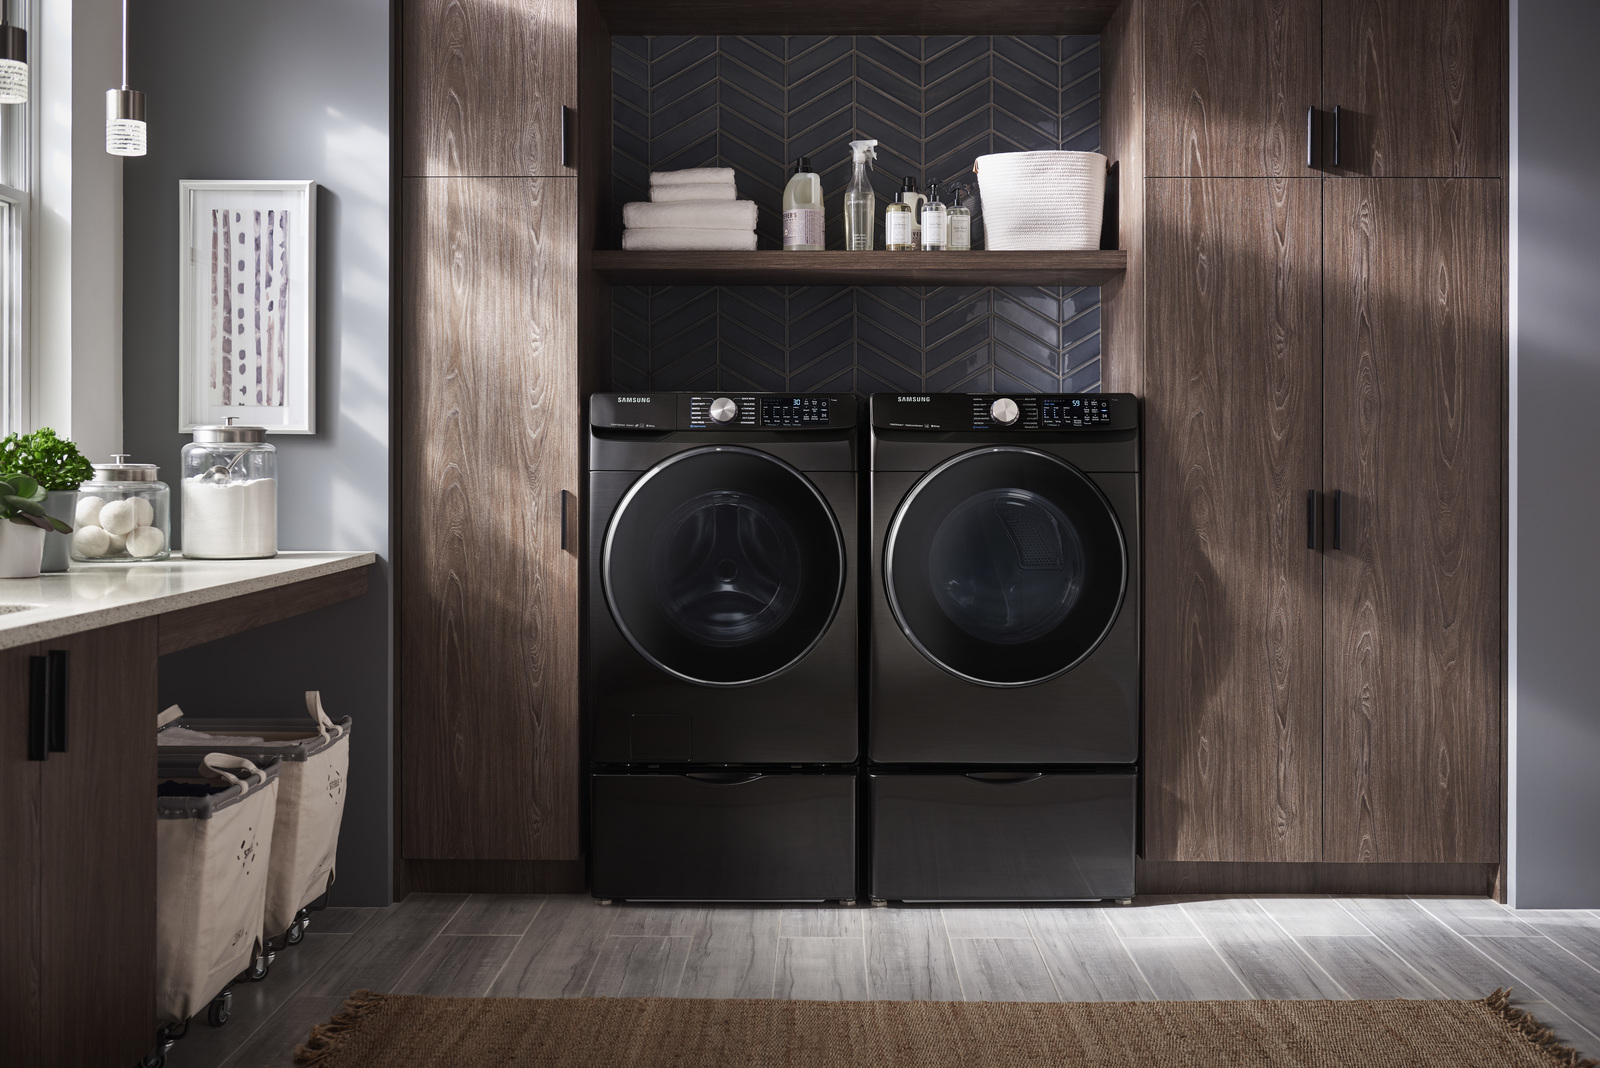 Thumbnail image of 4.5 cu. ft. Smart Front Load Washer with Super Speed in Black Stainless Steel